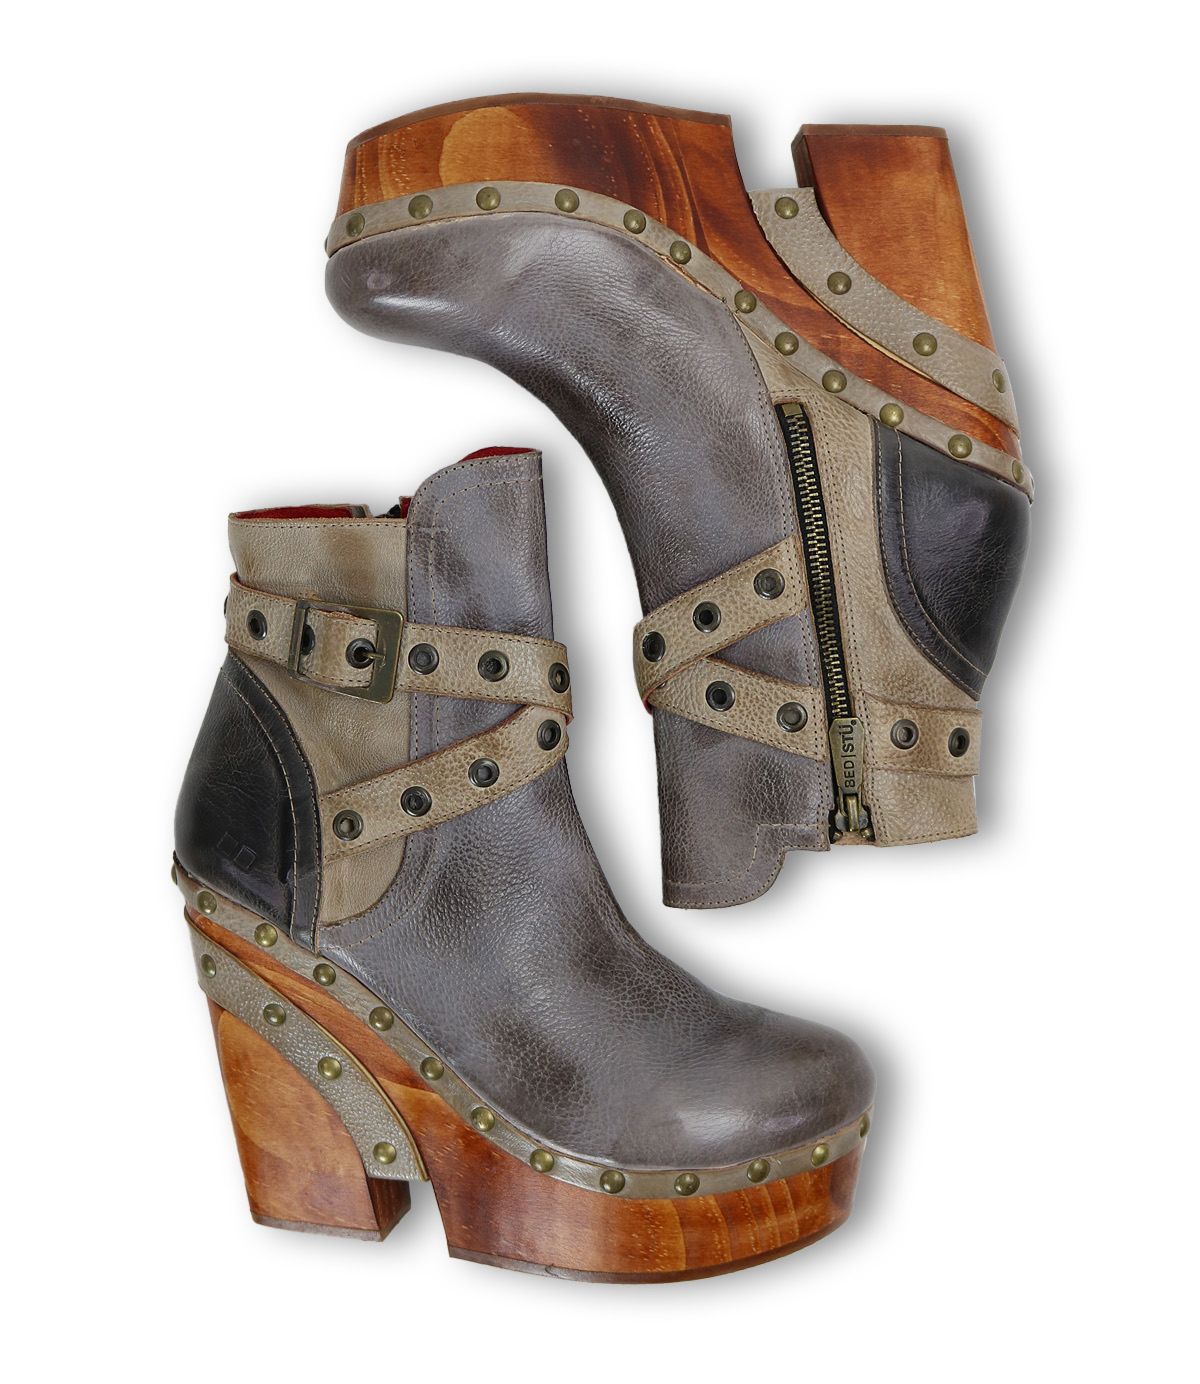 Bed Stü women's shoes, made in Mexico. Tonic Breeze,Dramatic heel, tough straps, metal studs - perfect for concerts. Cushioned insole for comfort. Available at Rustic Chic Boutique Mackinac Island, Michigan.